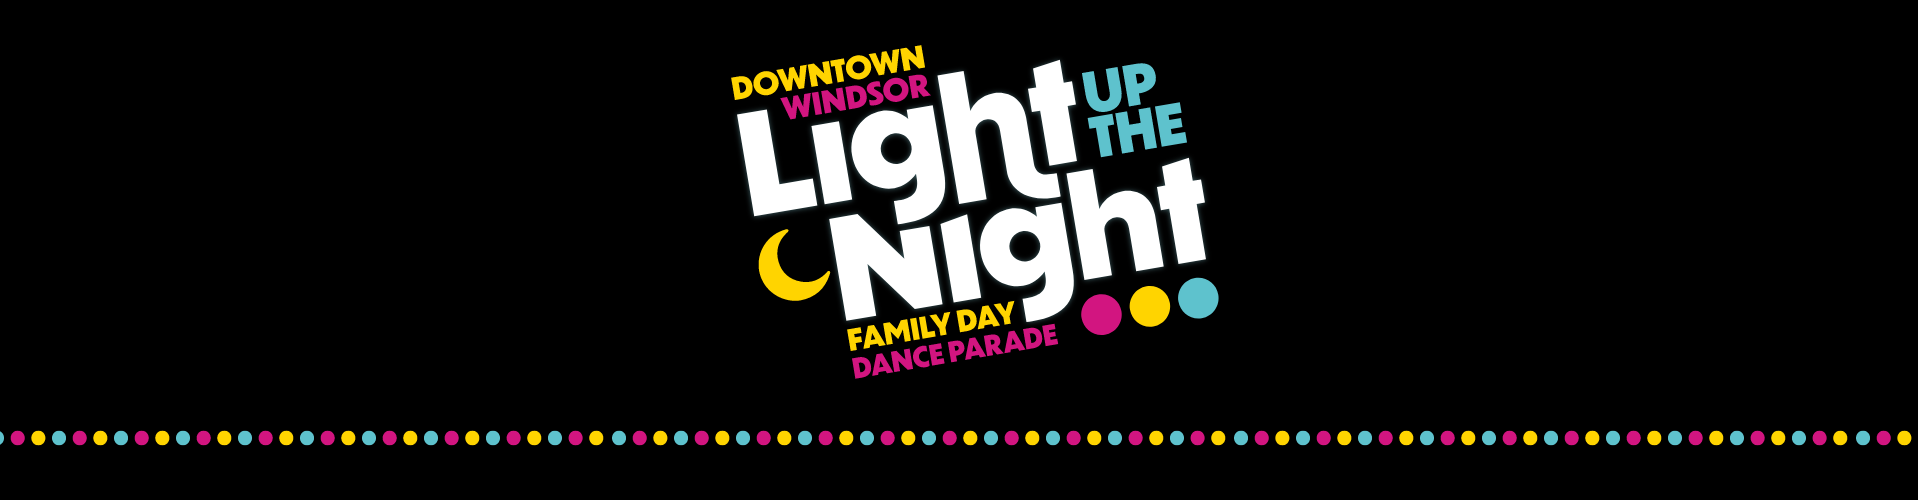 Downtown Windsor Light Up the Night Family Day Dance Parade